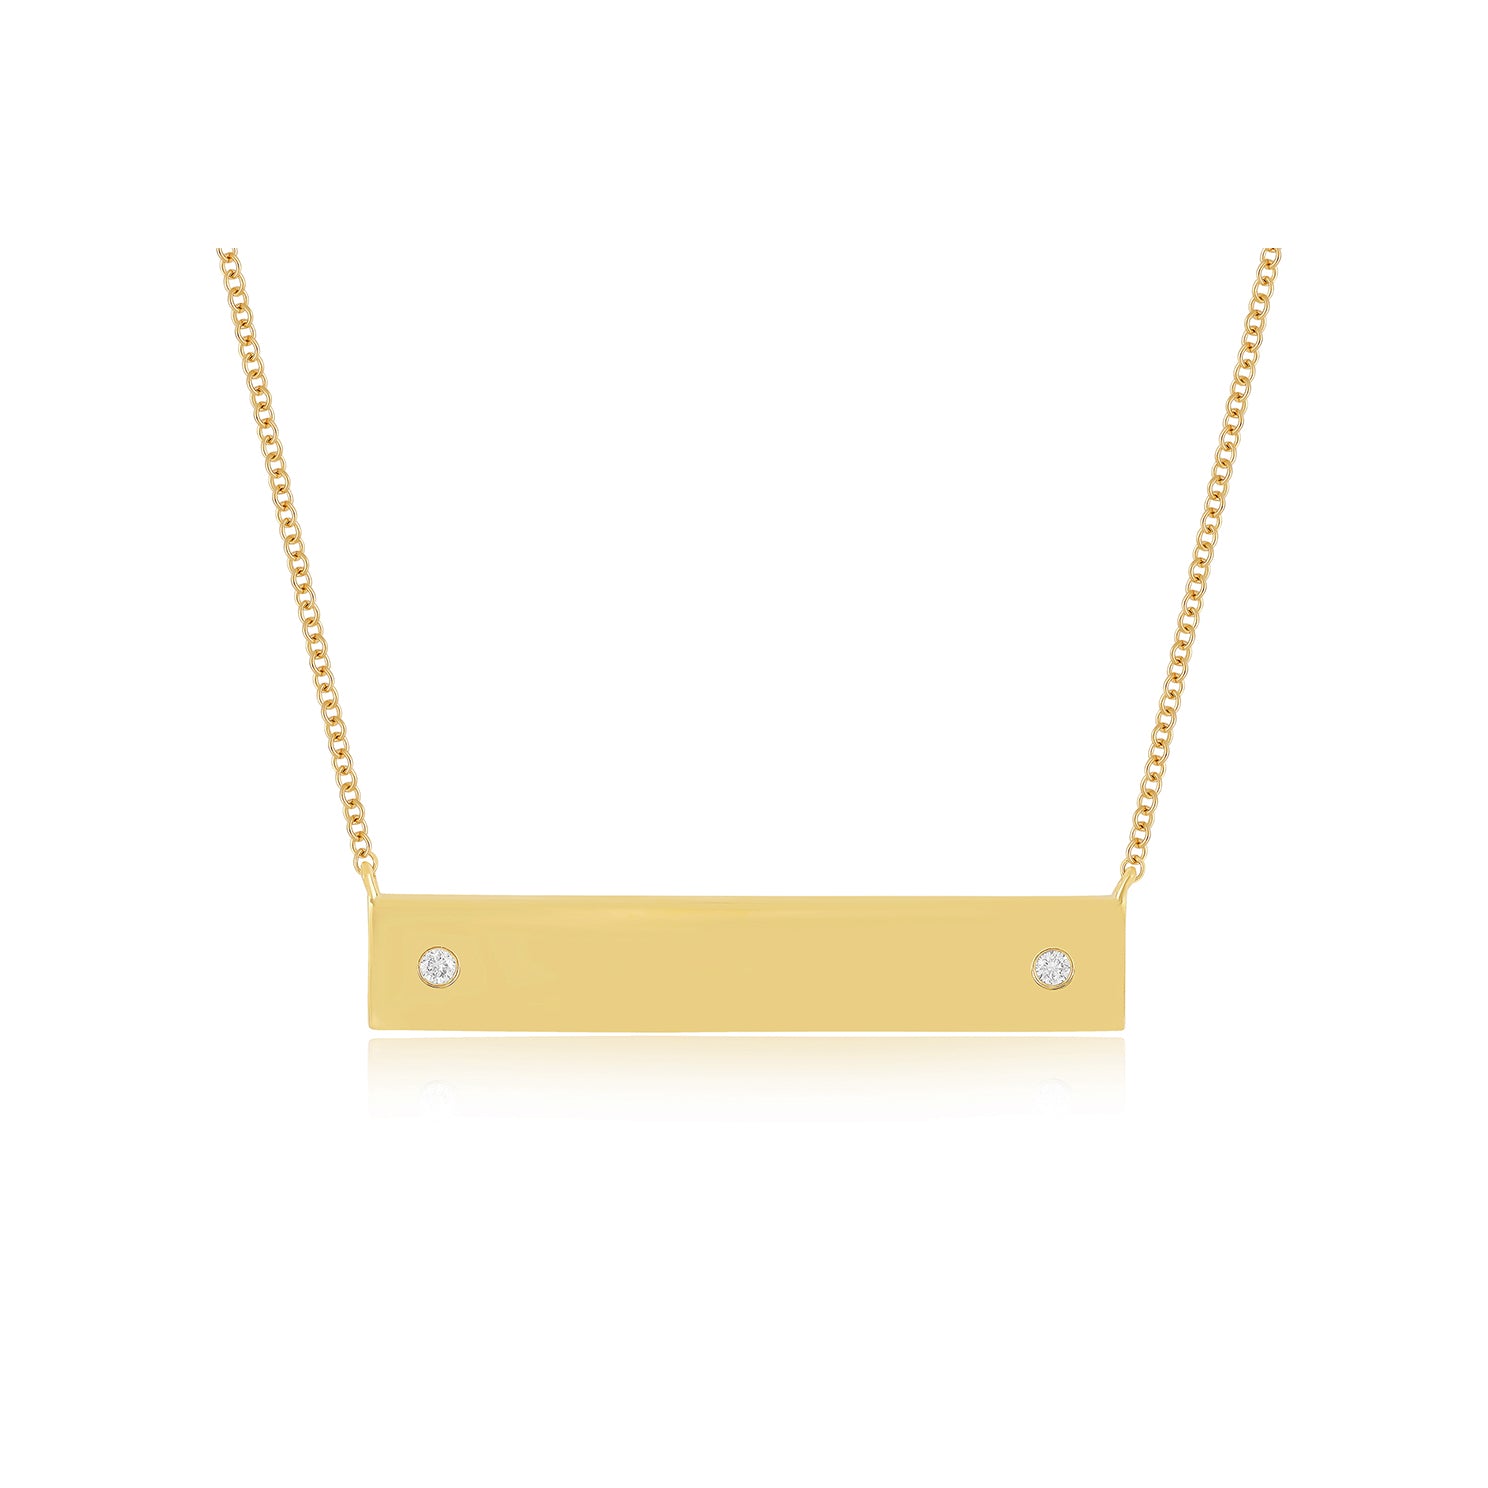 Nameplate Necklace in 14k yellow gold